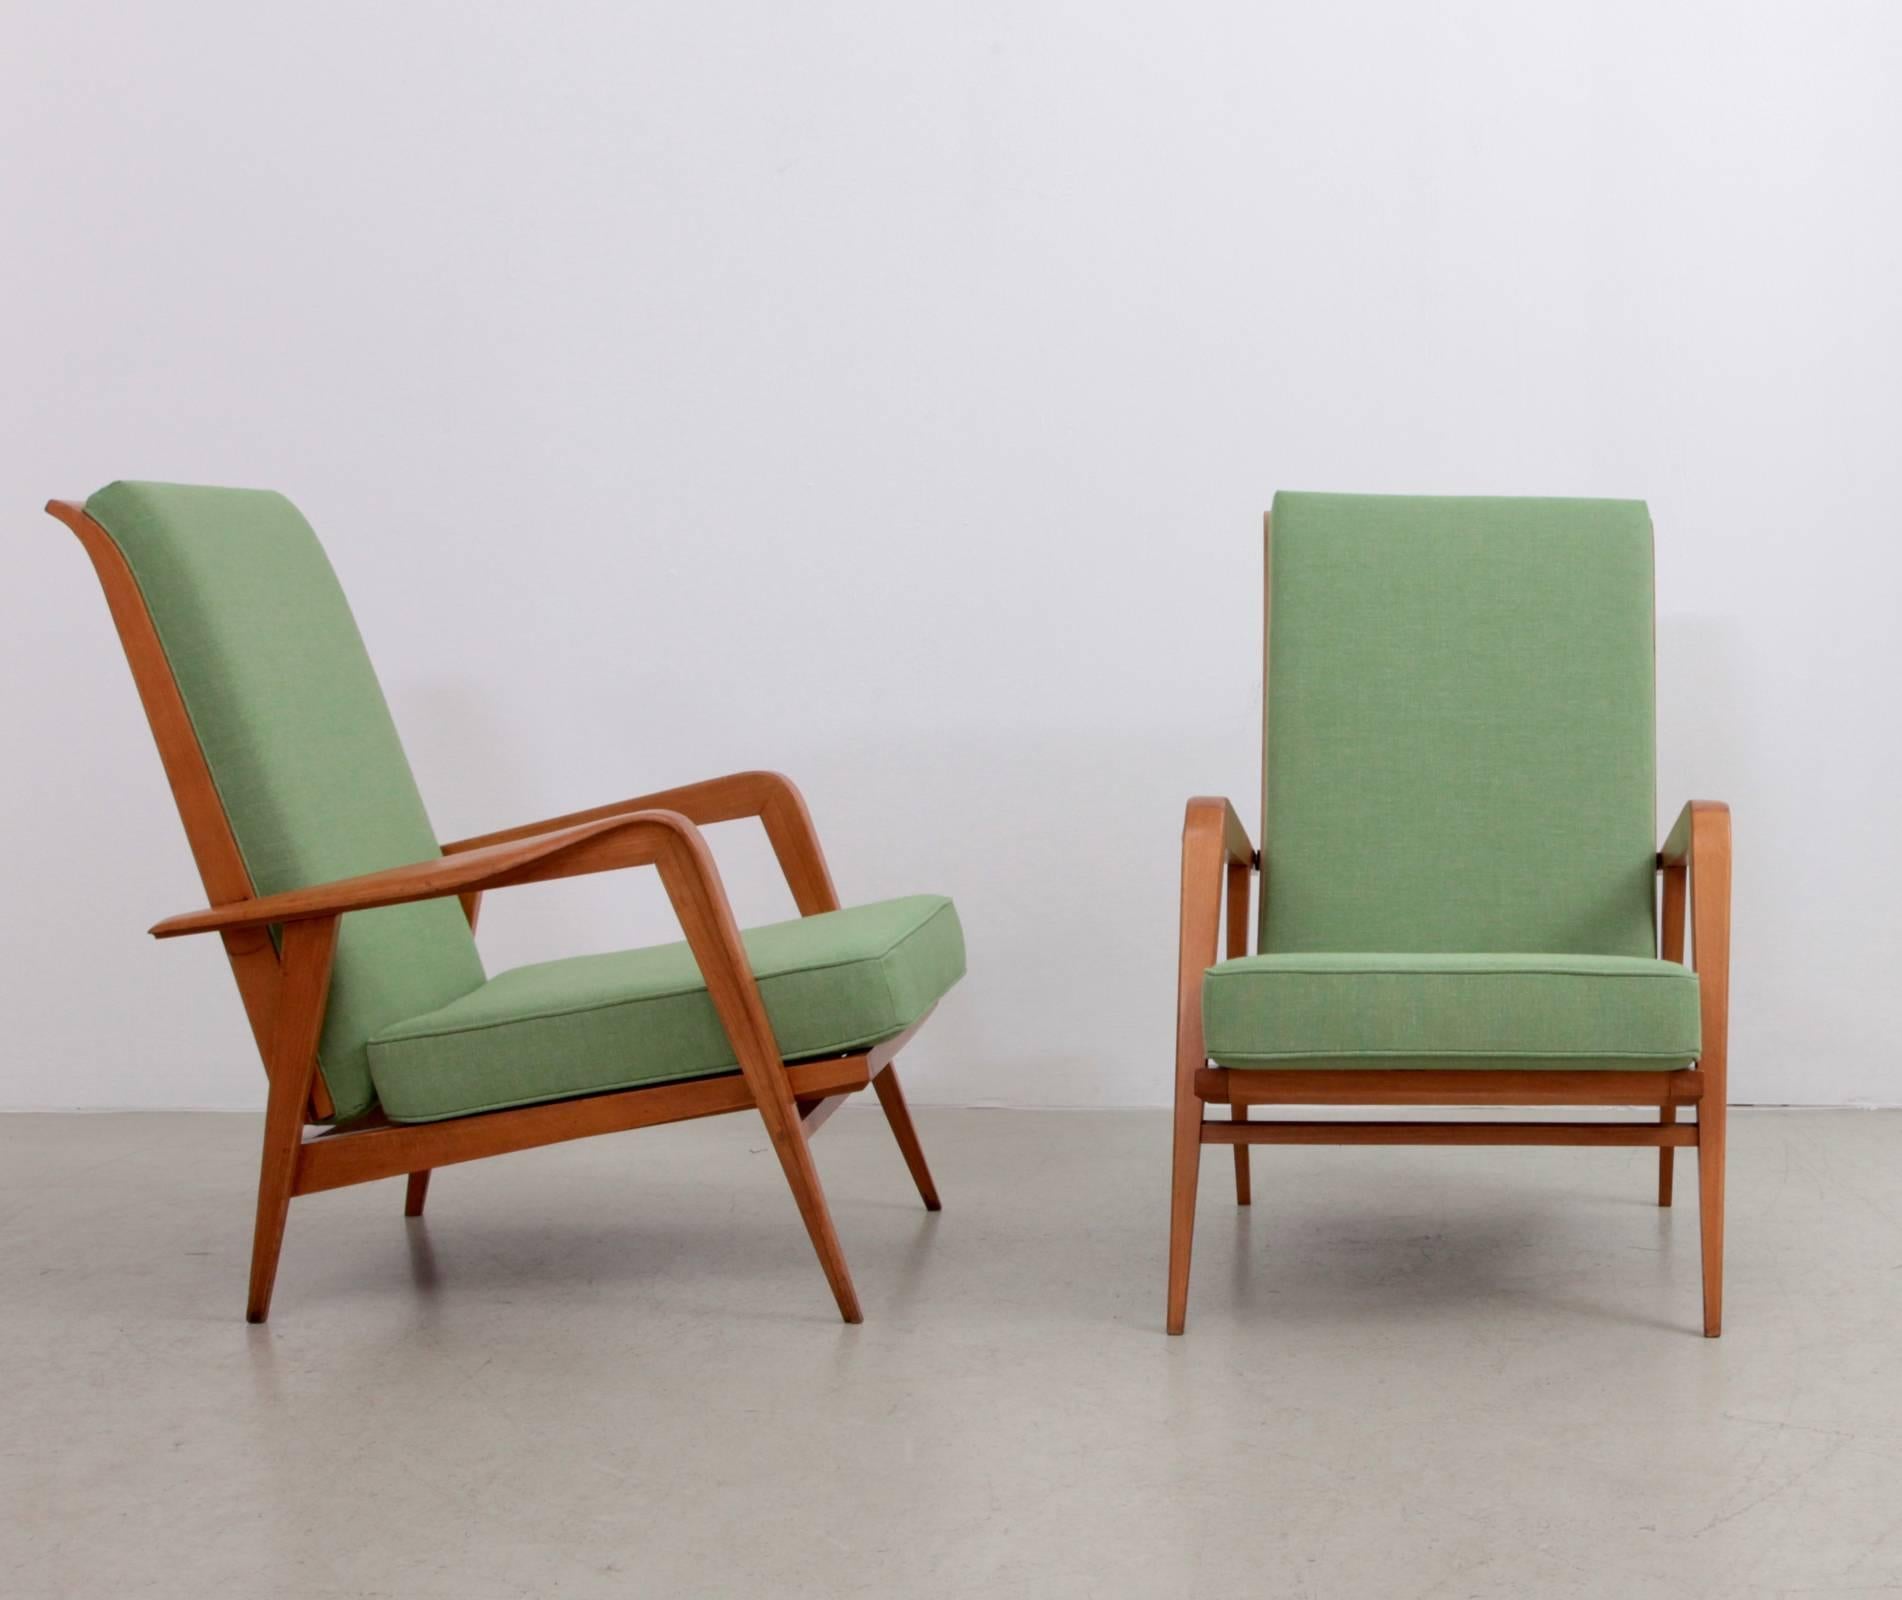 Pair of upholstered armchairs with solid beechwood frame by Etienne Henri Martin. These chairs have two different positions.

